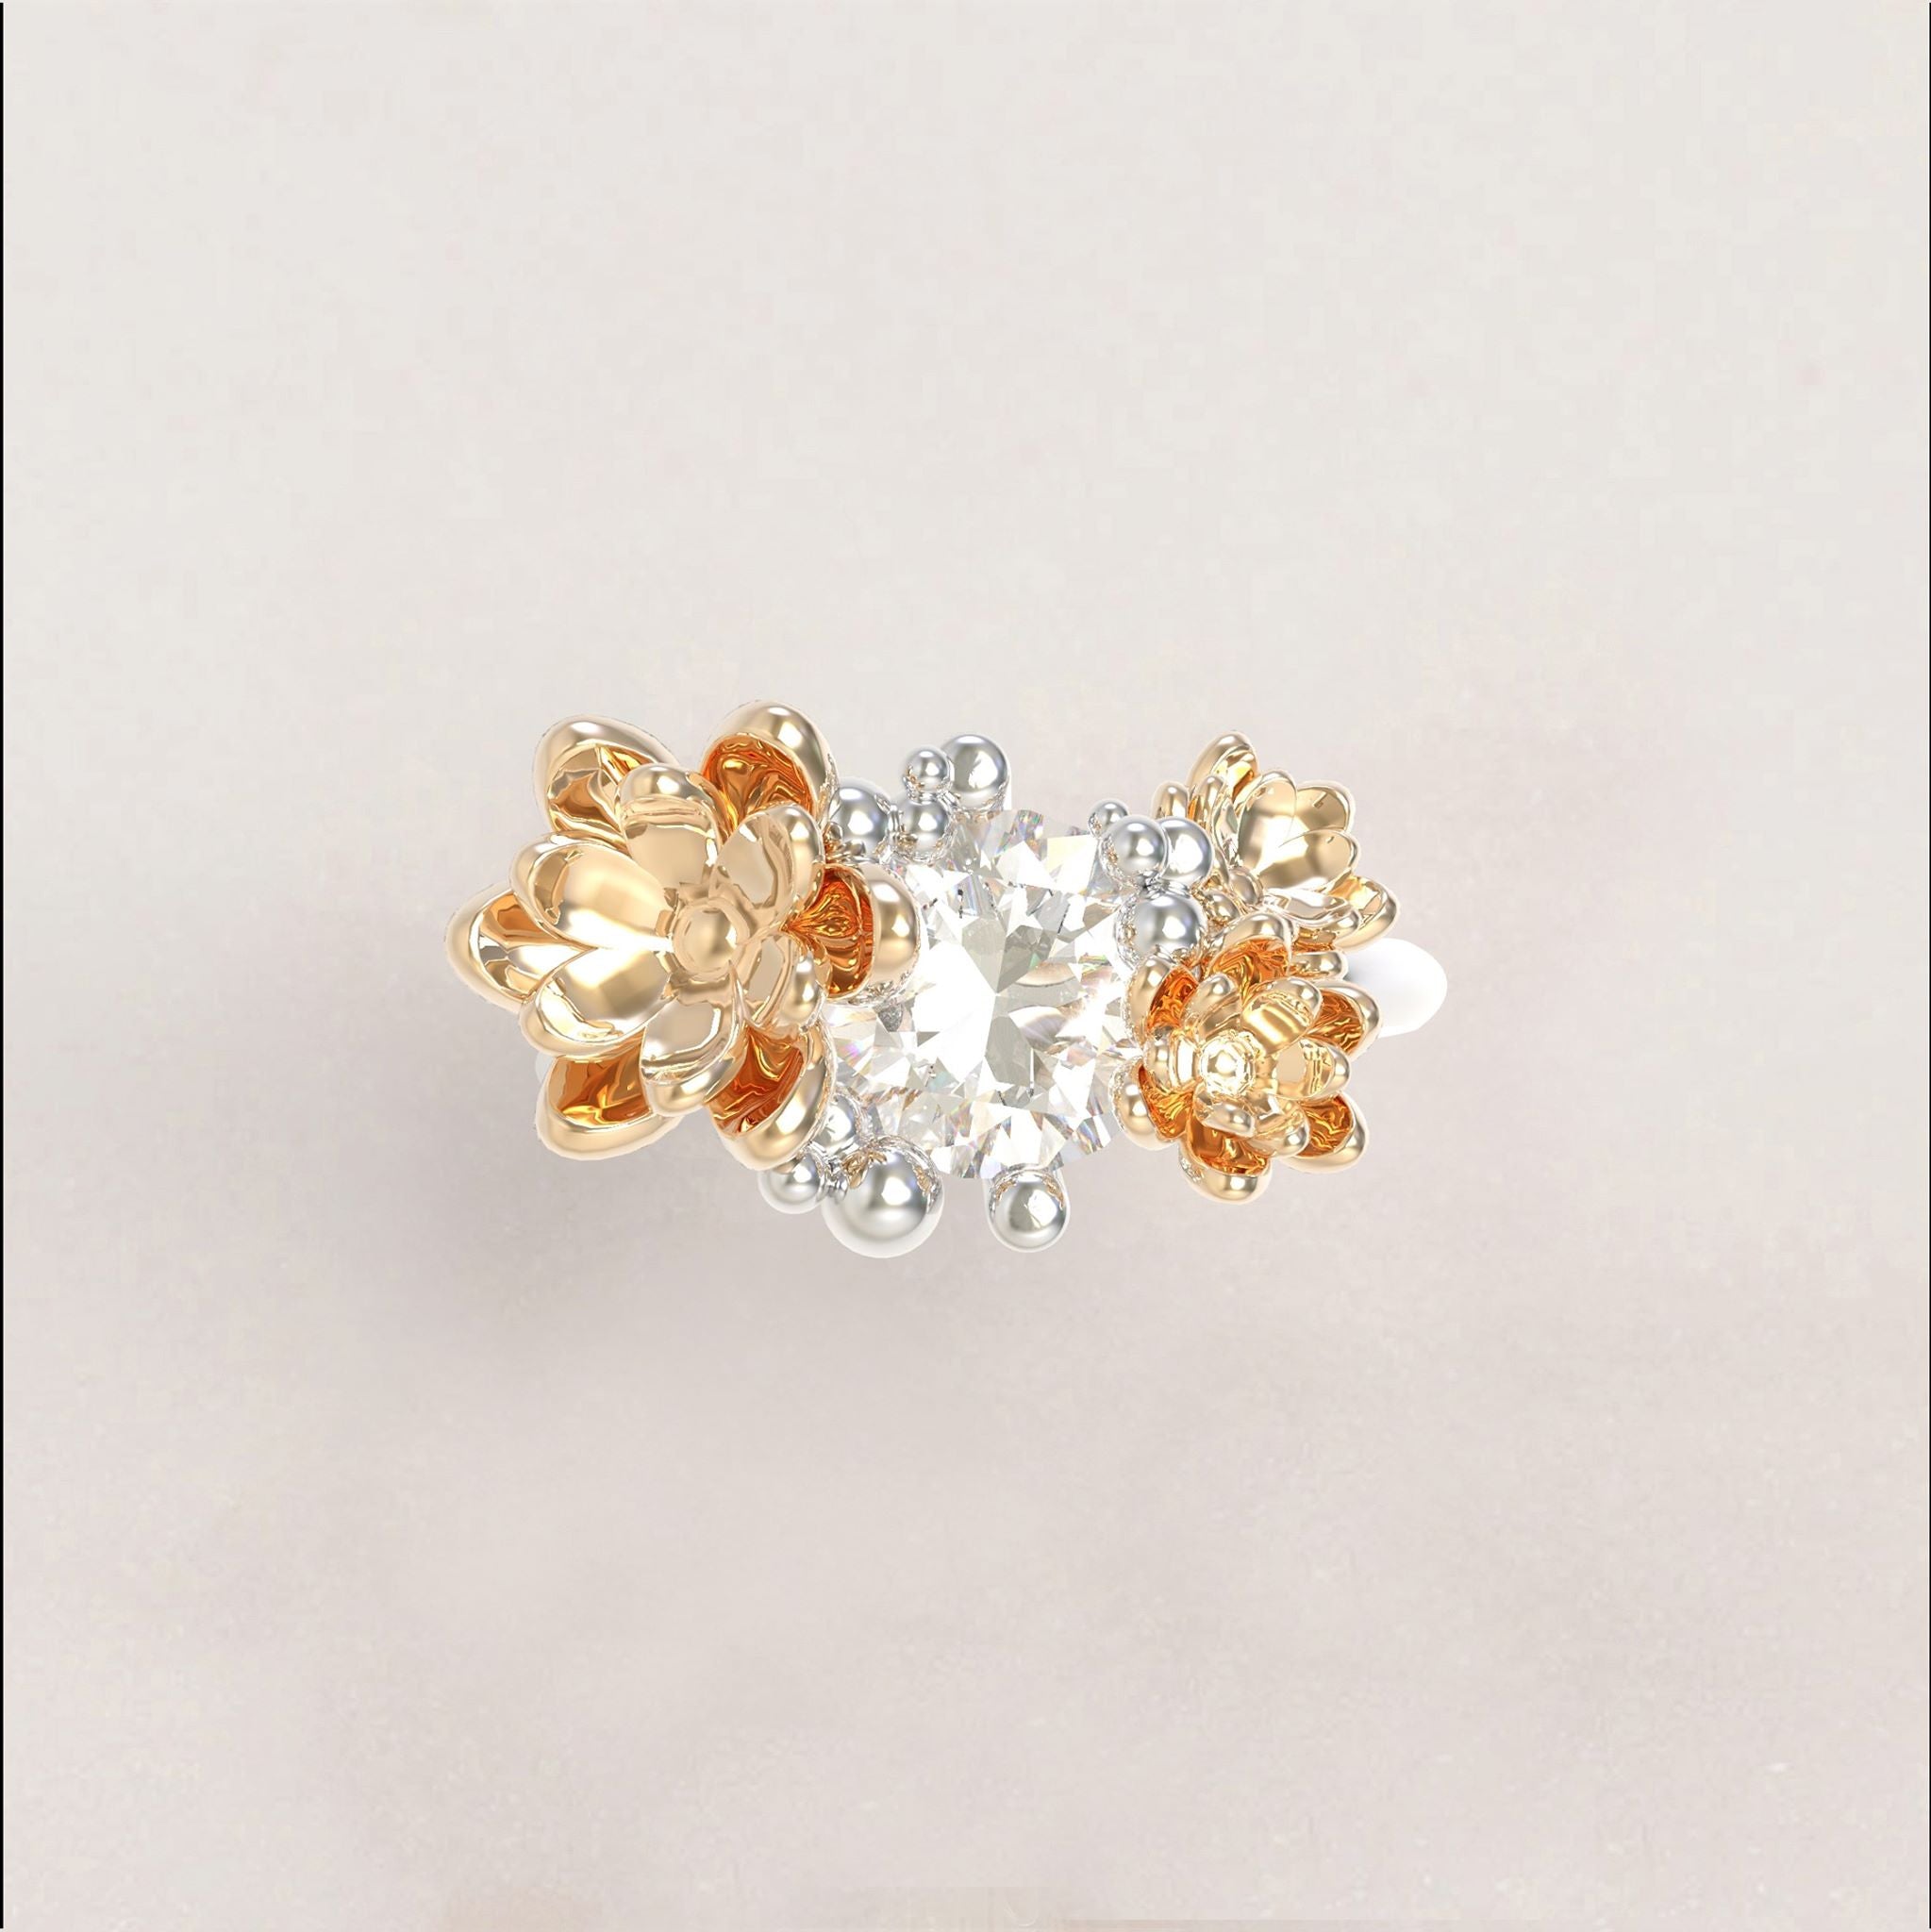 Two-toned Flowers Engagement Ring No.14 in White Gold Band/Yellow Gold Flowers - Moissanite/Diamond